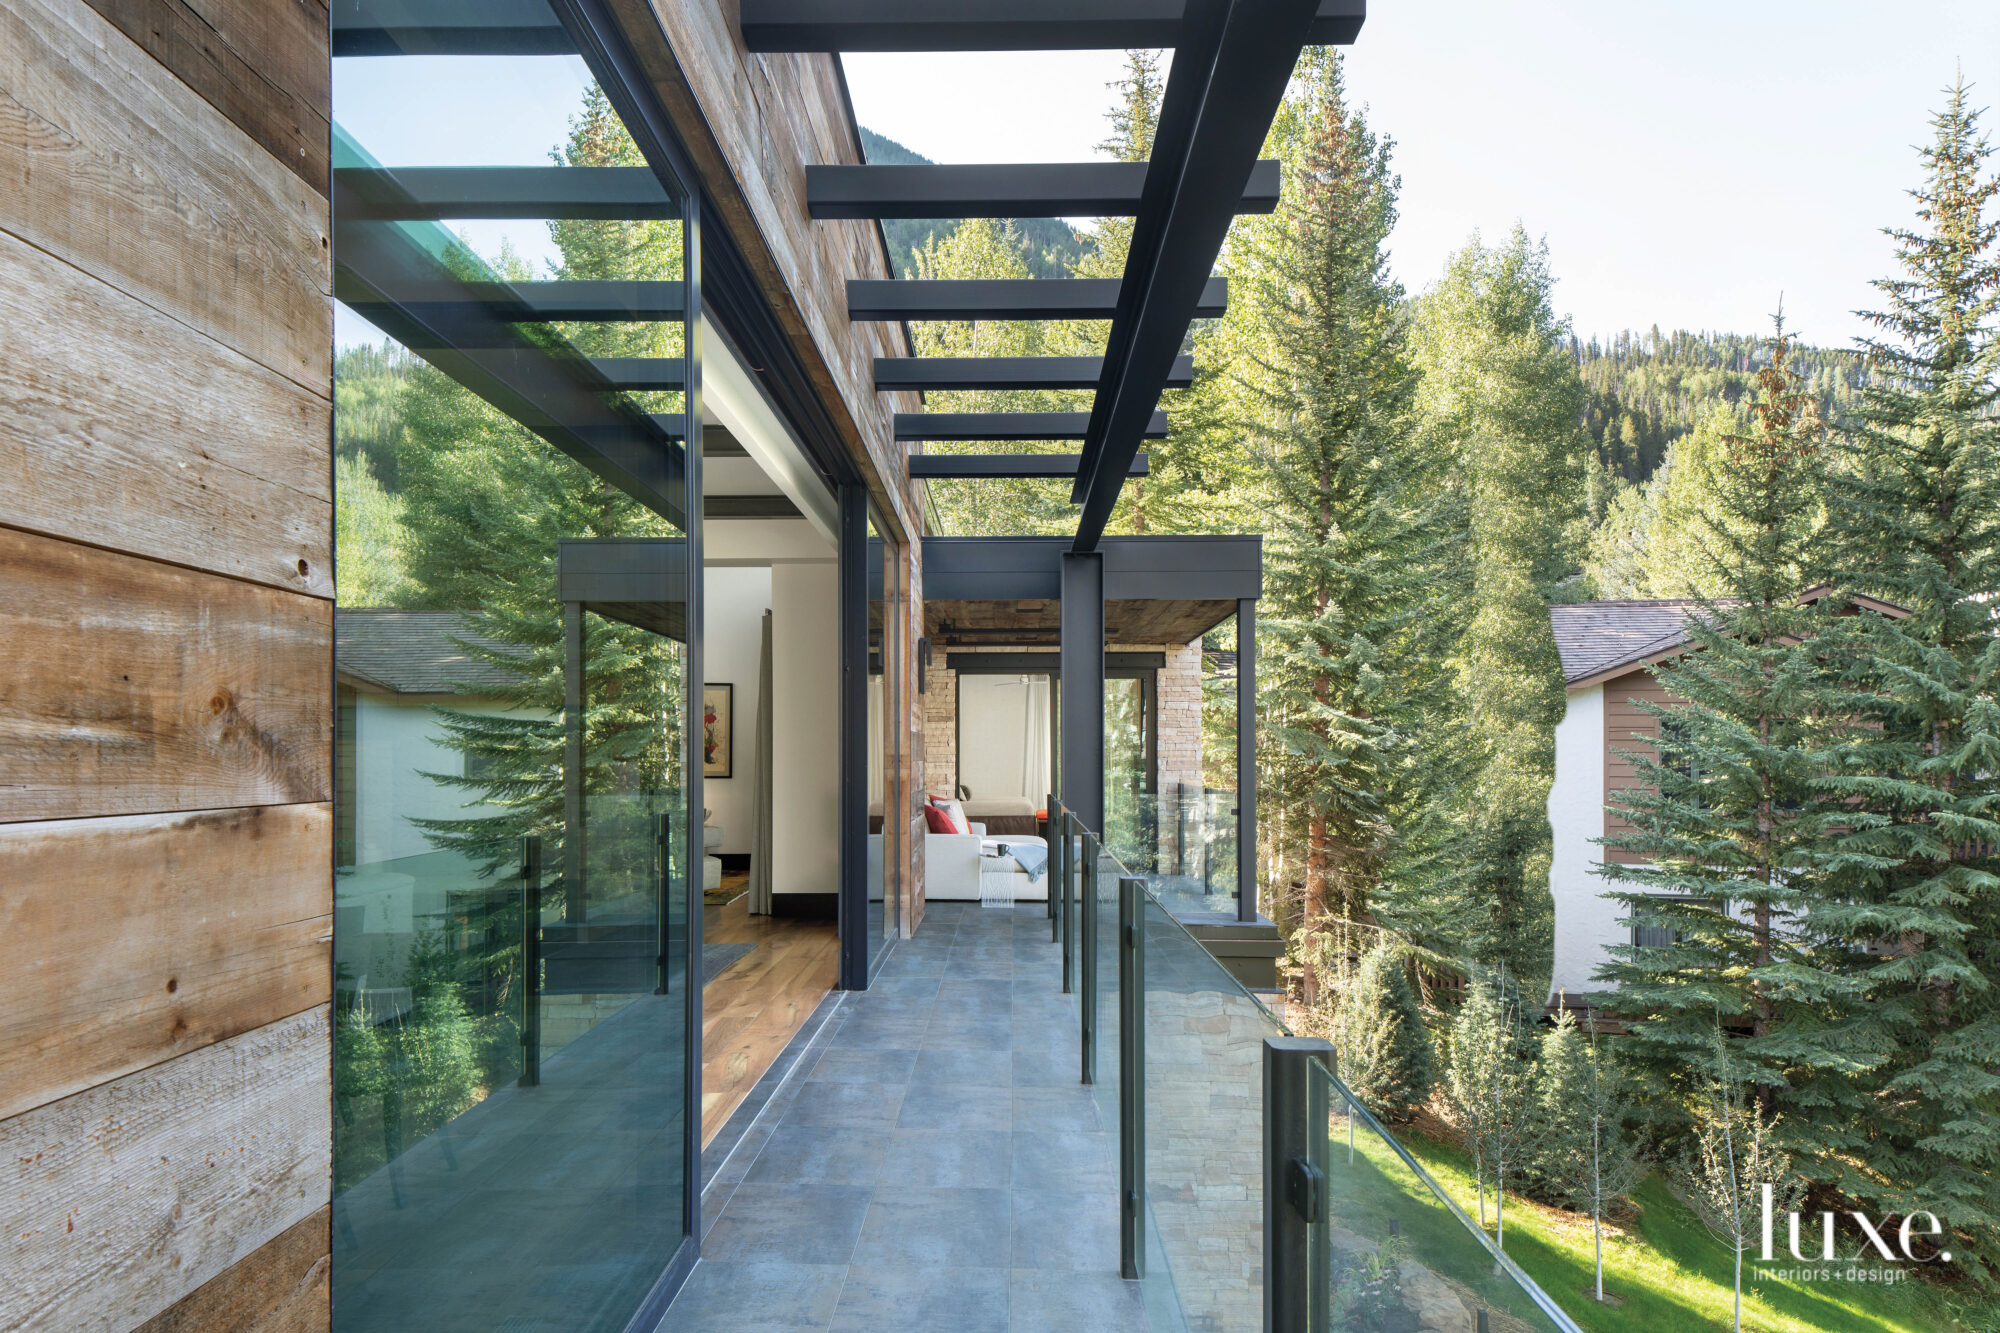 Large glass doors open onto a stone-tiled deck.